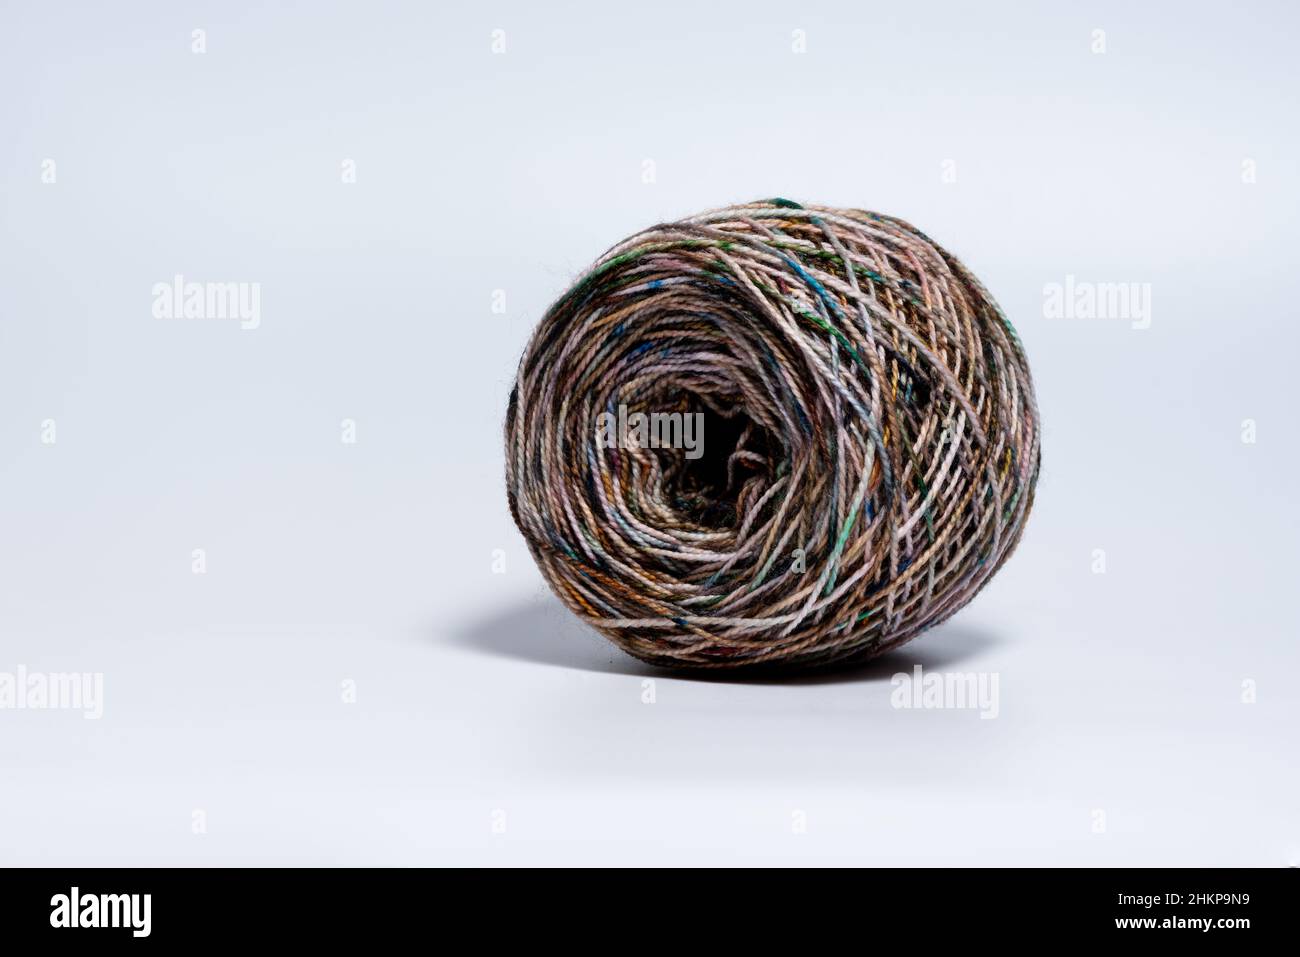 Single skein ball of yarn with variegated colors on white background Stock Photo